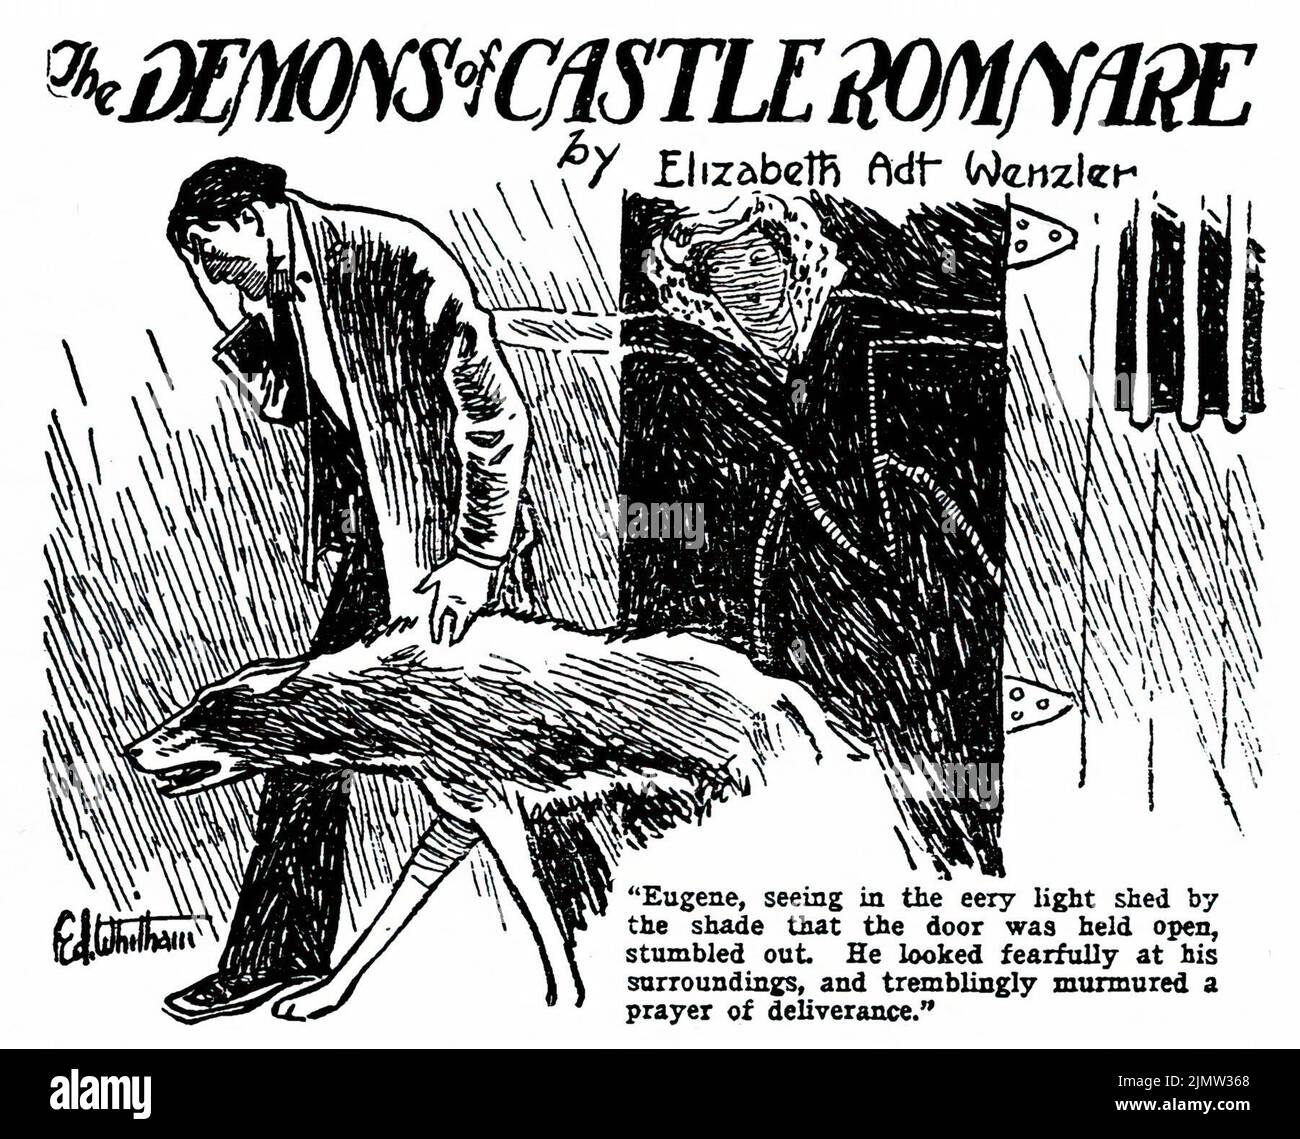 The Demons of Castle Romnare, by Elizabeth Adt Wenzler. Illustration by Ed Whitham from Weird Tales, July 1926 Stock Photo